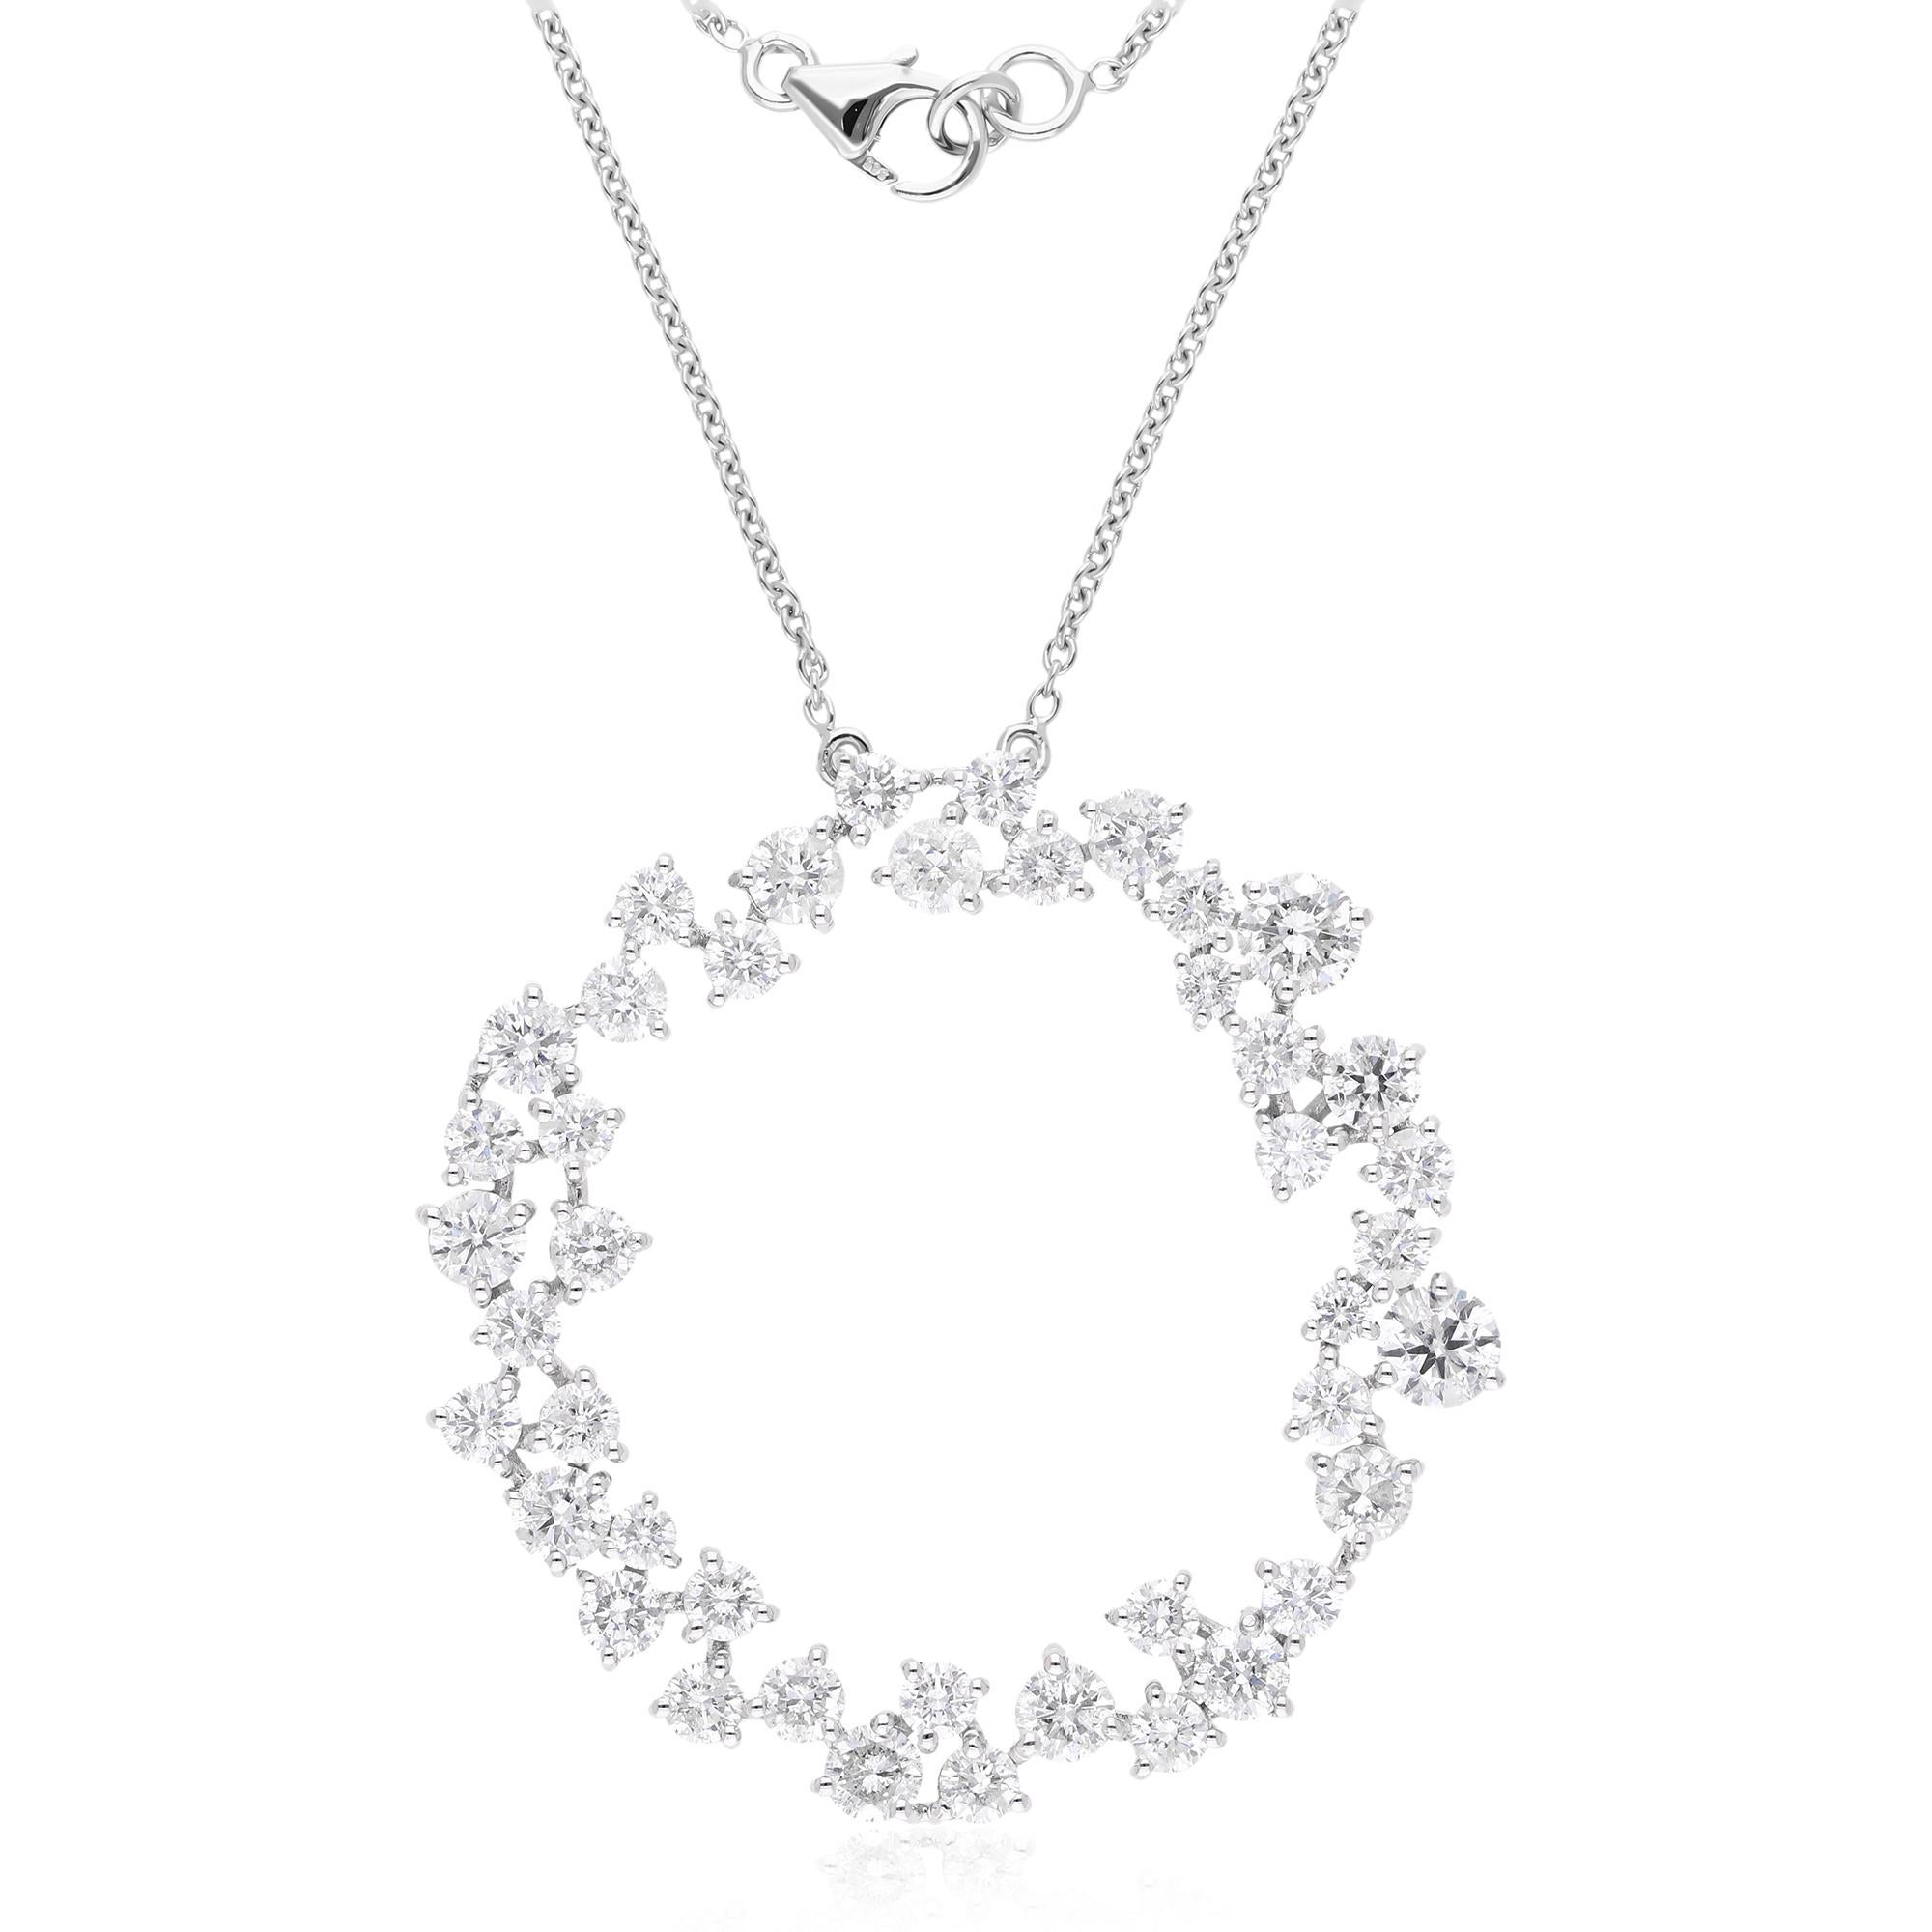 At its center, a mesmerizing circle pendant takes center stage, adorned with a spectacular array of round-cut diamonds totaling 5.98 carats. Each diamond, carefully selected for its superior clarity (SI) and dazzling white hue (HI), exudes